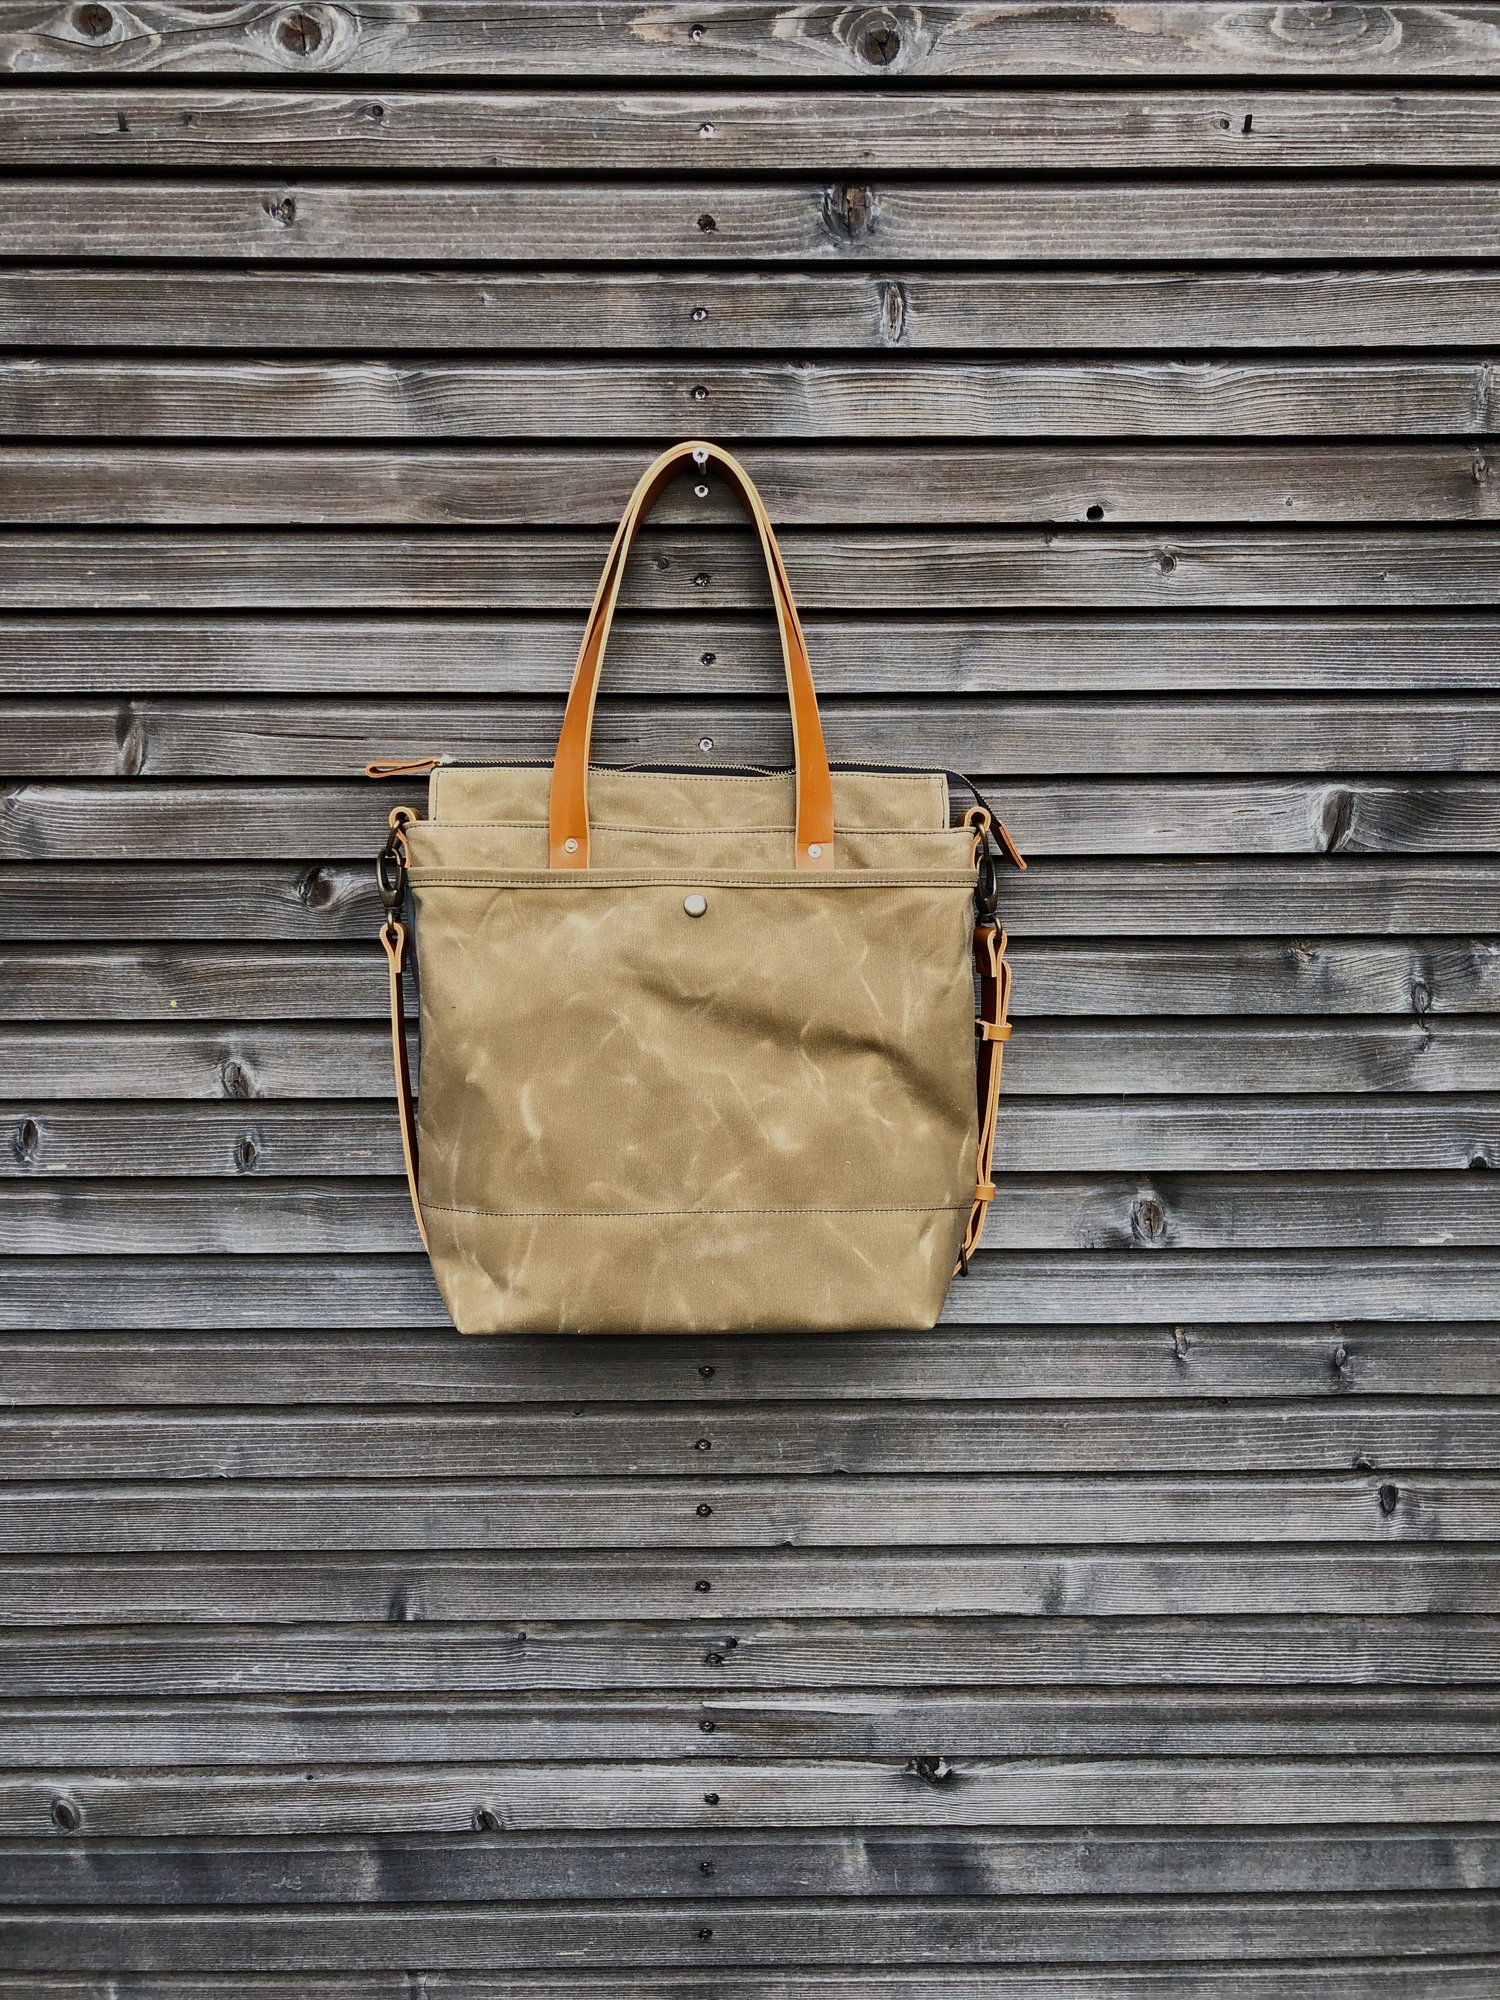 Image of Waxed canvas tote bag / office bag with leather handles and cross body strap